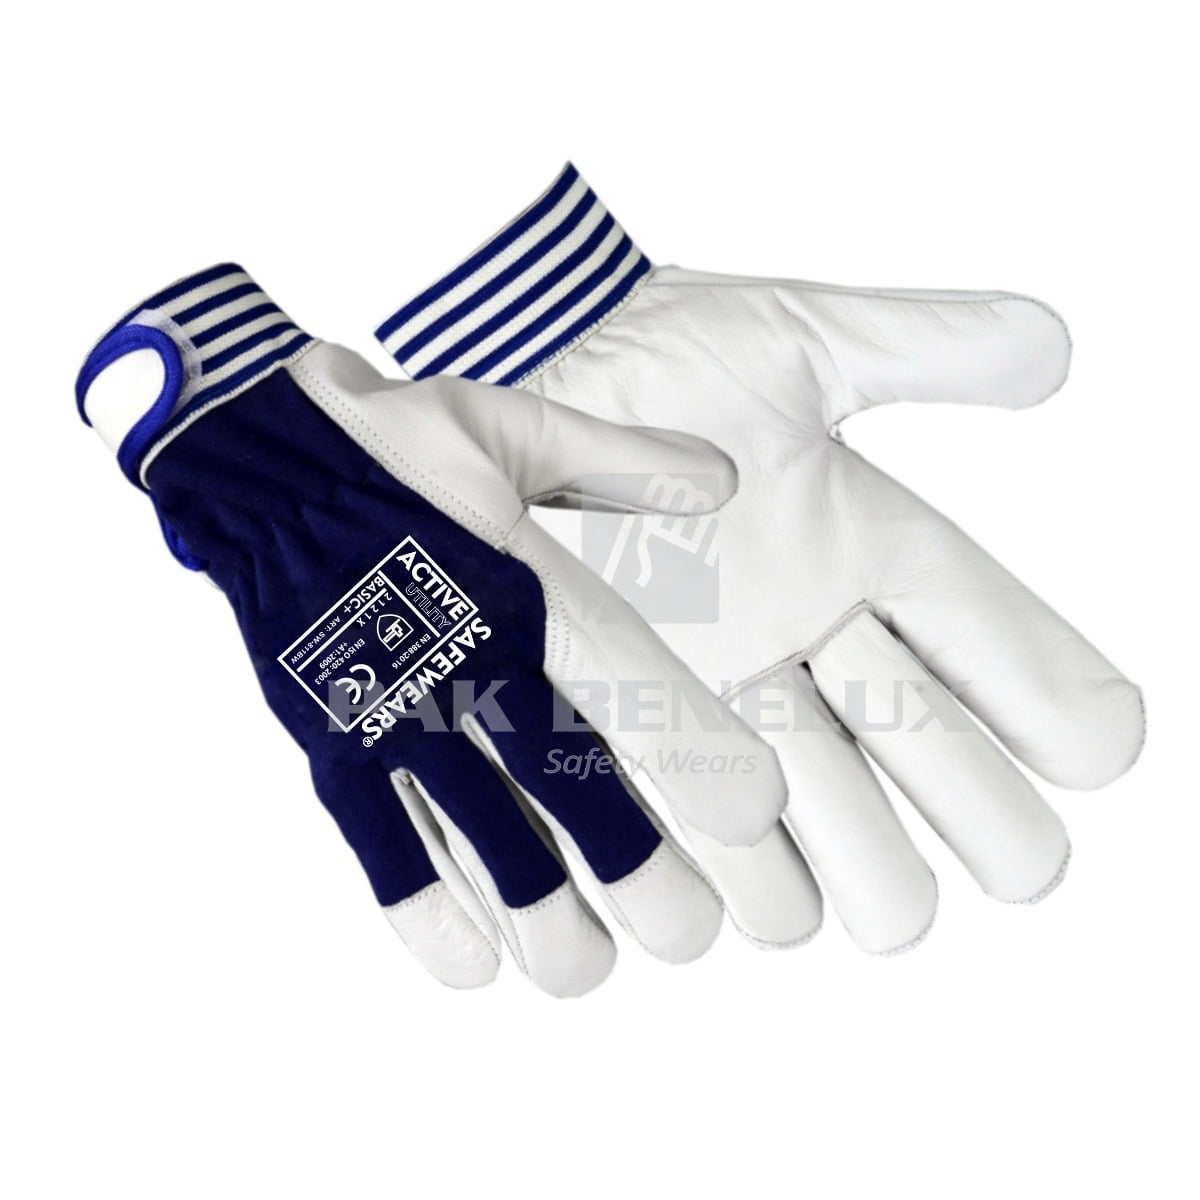 Assembly Gloves Manufacturer in Pakistan